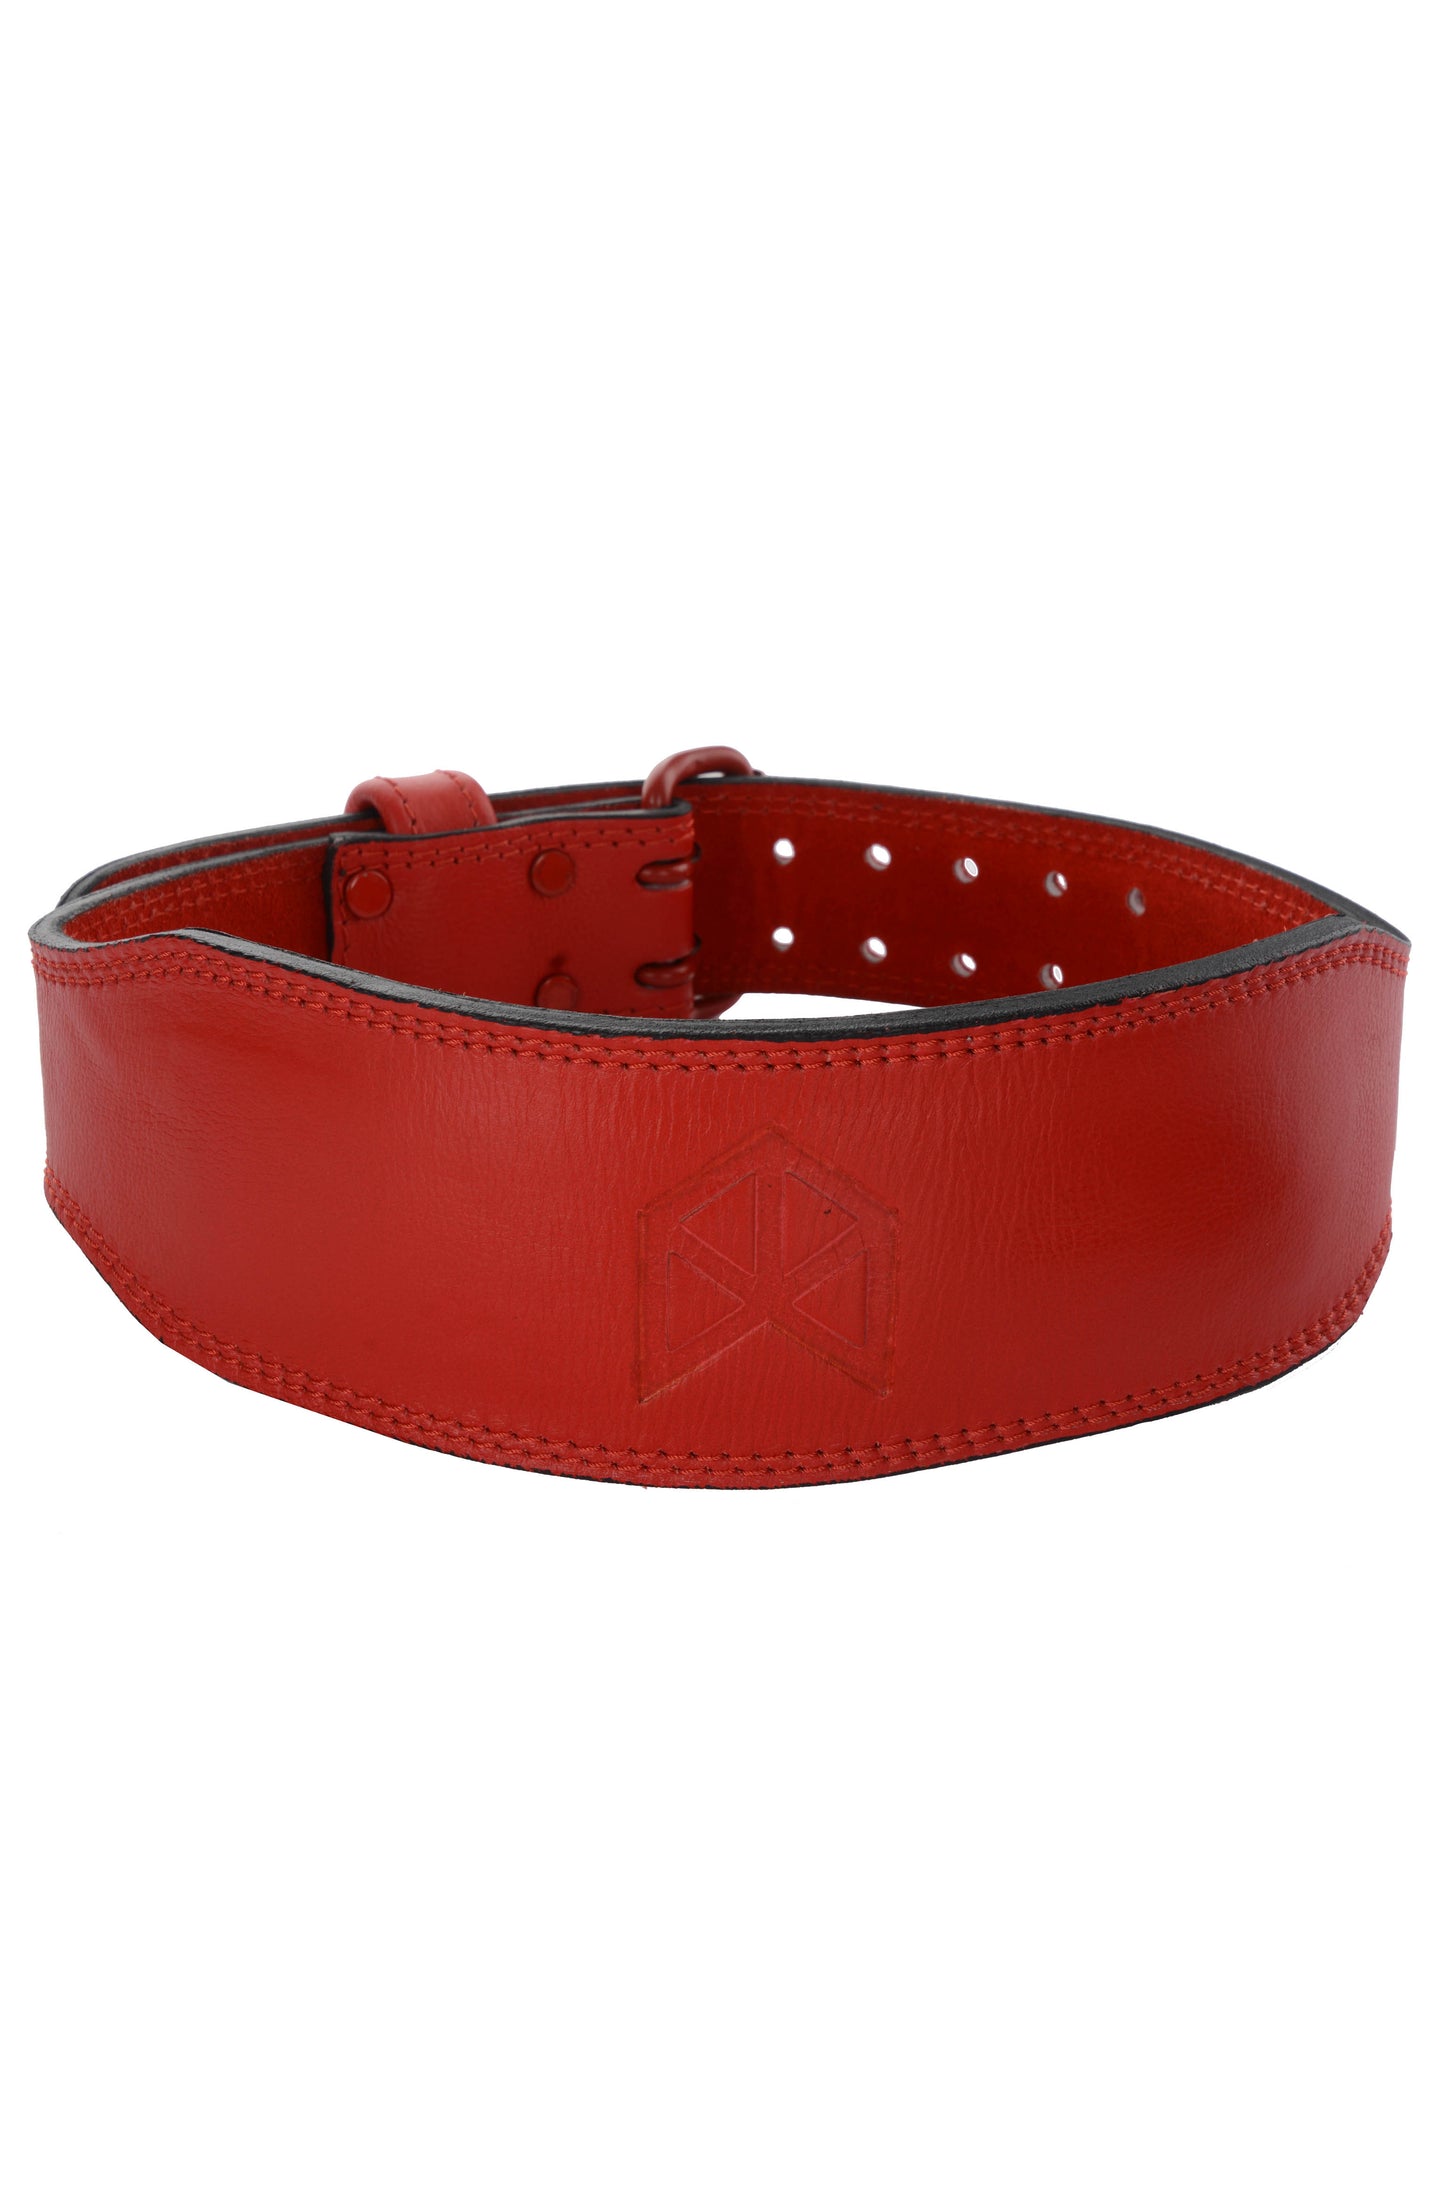 BMFIT Premium All Red Series - Leather Weightlifting Belt